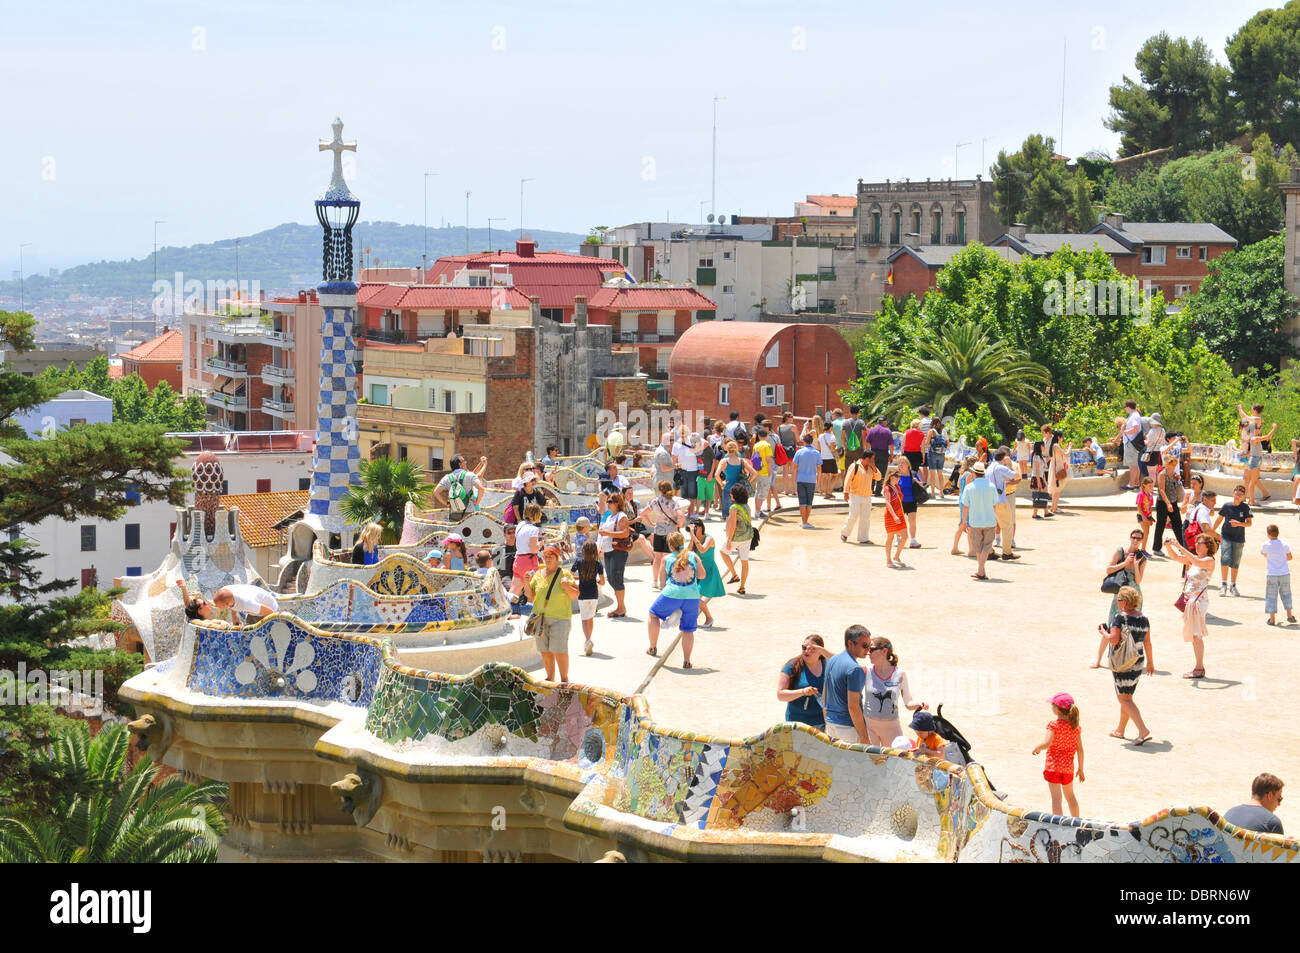 Barcelona, Spain: Tourists visiting the famous Park Guell, architectural landmark designed by the famous architect Antonio Gaudi Stock Photo